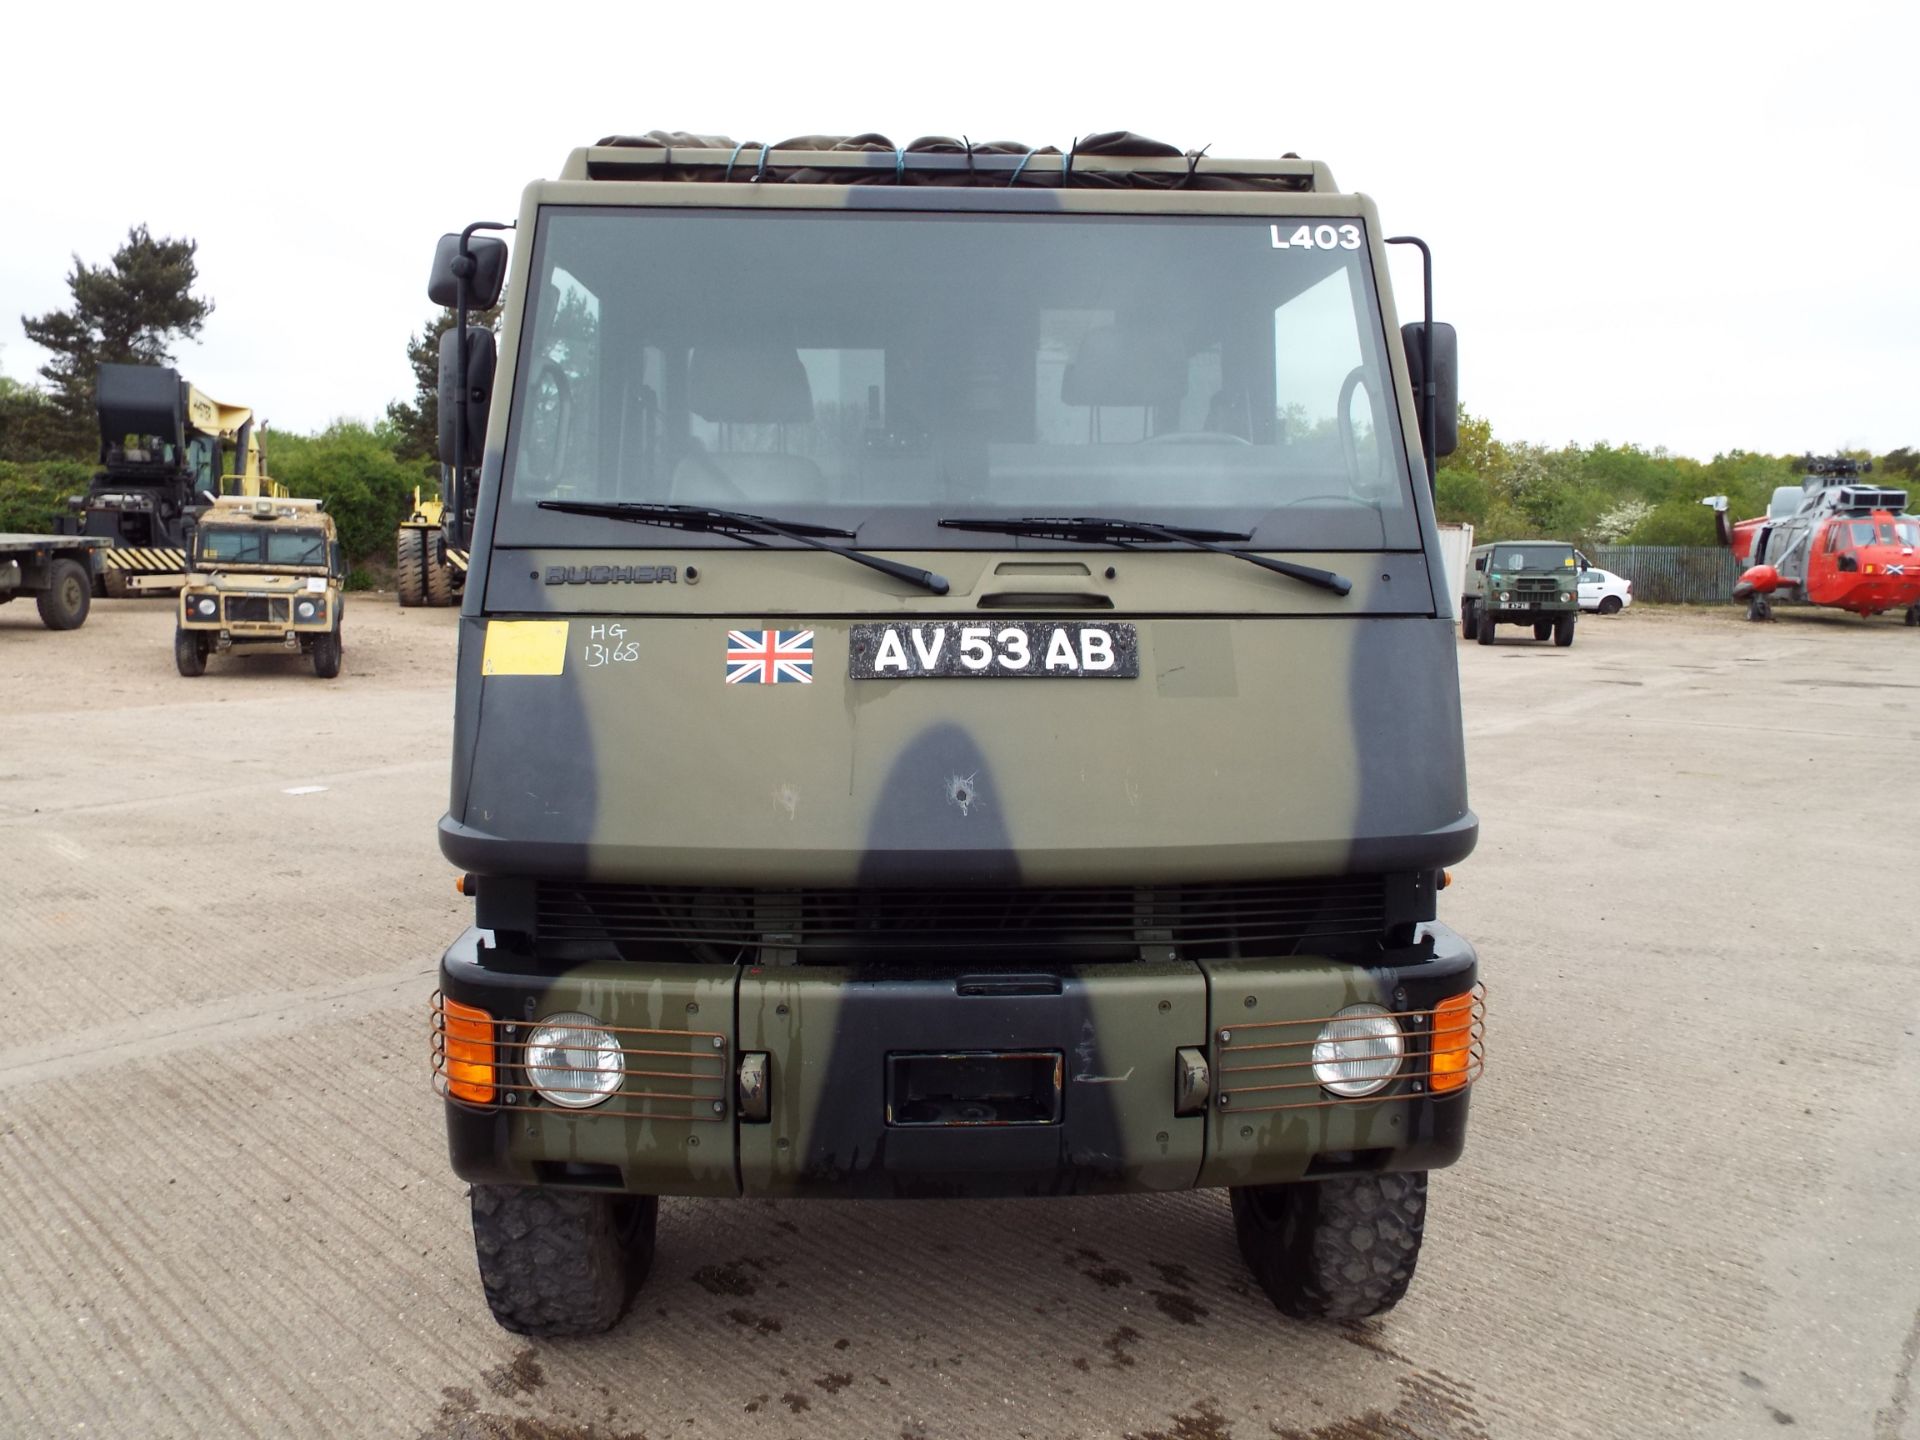 Ex Reserve Left Hand Drive Mowag Bucher Duro II 6x6 High-Mobility Tactical Vehicle - Image 2 of 28